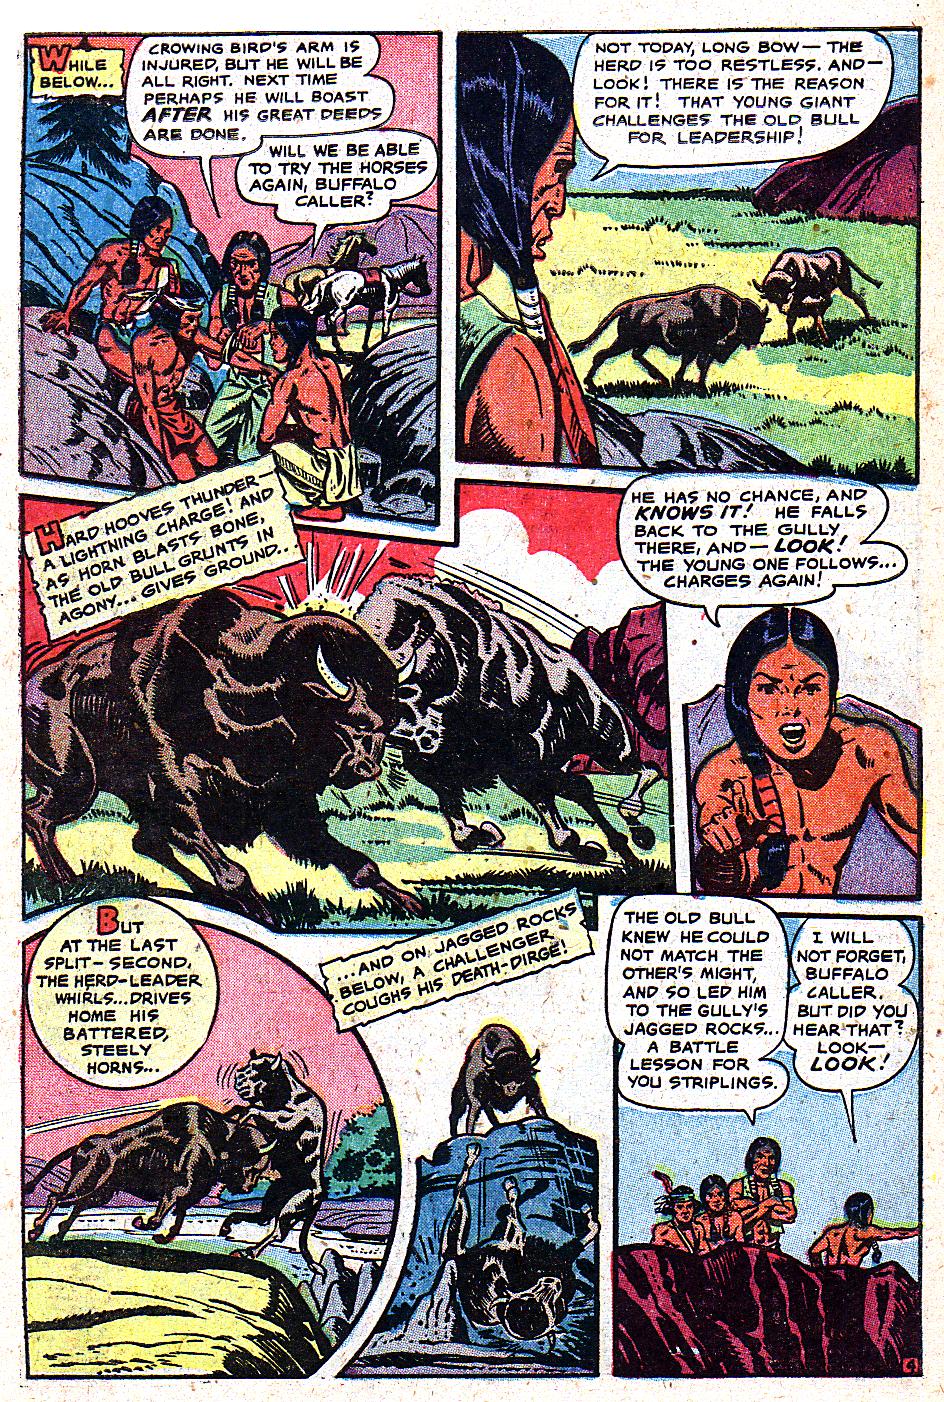 Read online Indians comic -  Issue #9 - 30